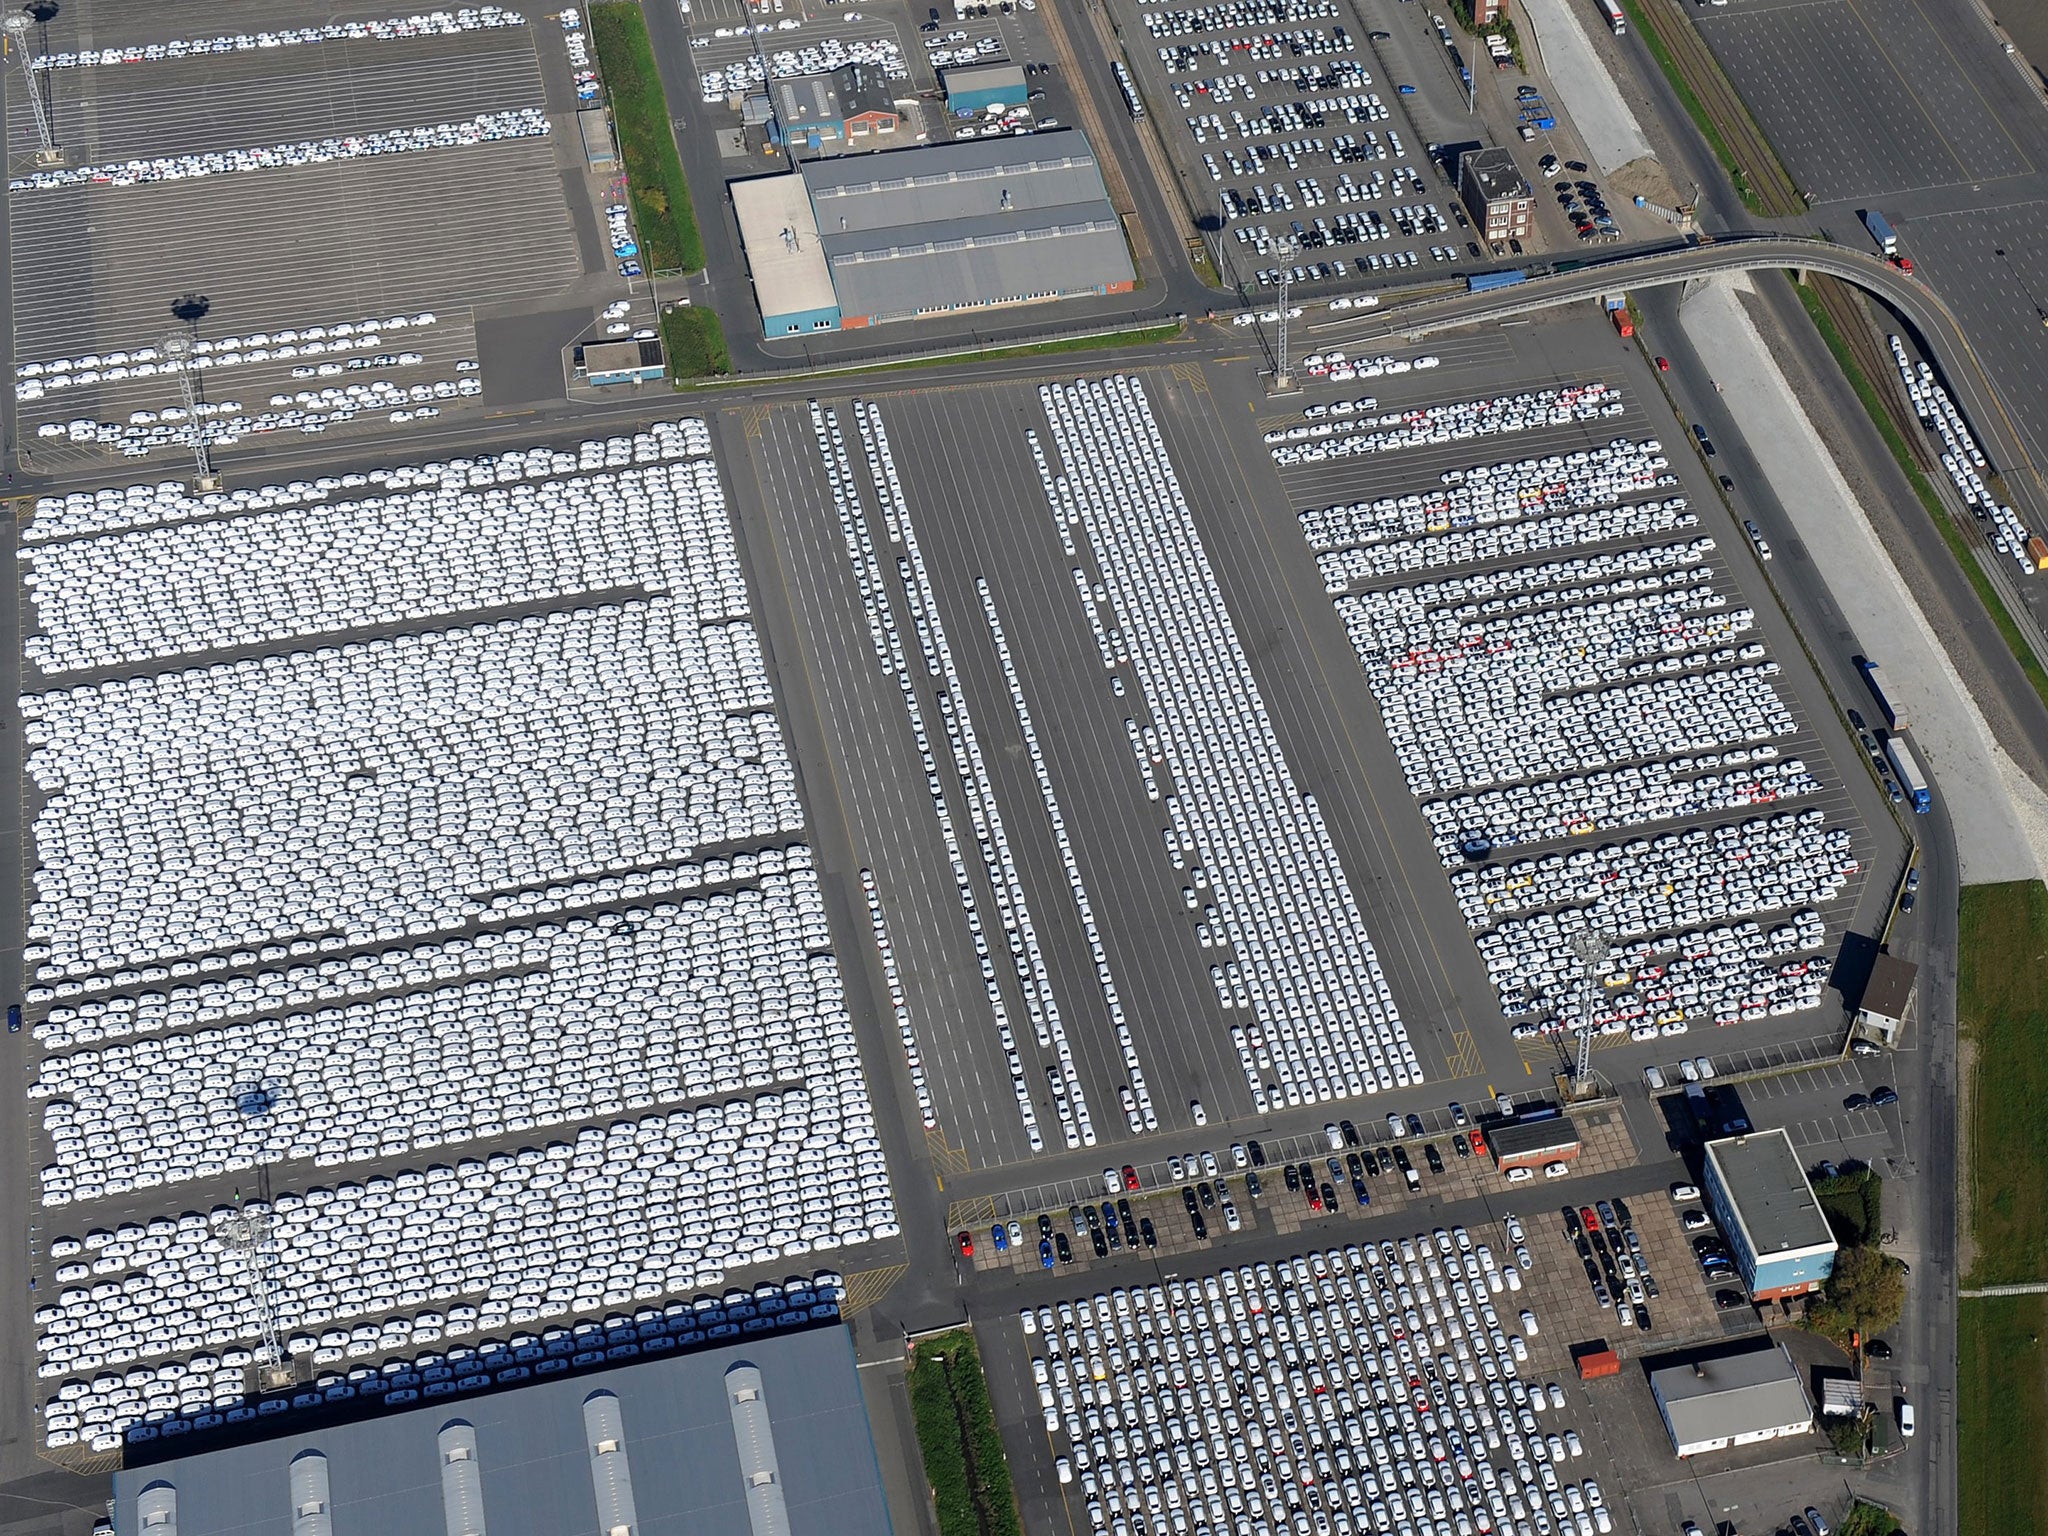 Brand new cars are gathered at a giant parking lot, ready to be shipped near the pier of the car terminal next to the Volkswagon plant in Emden, Germany